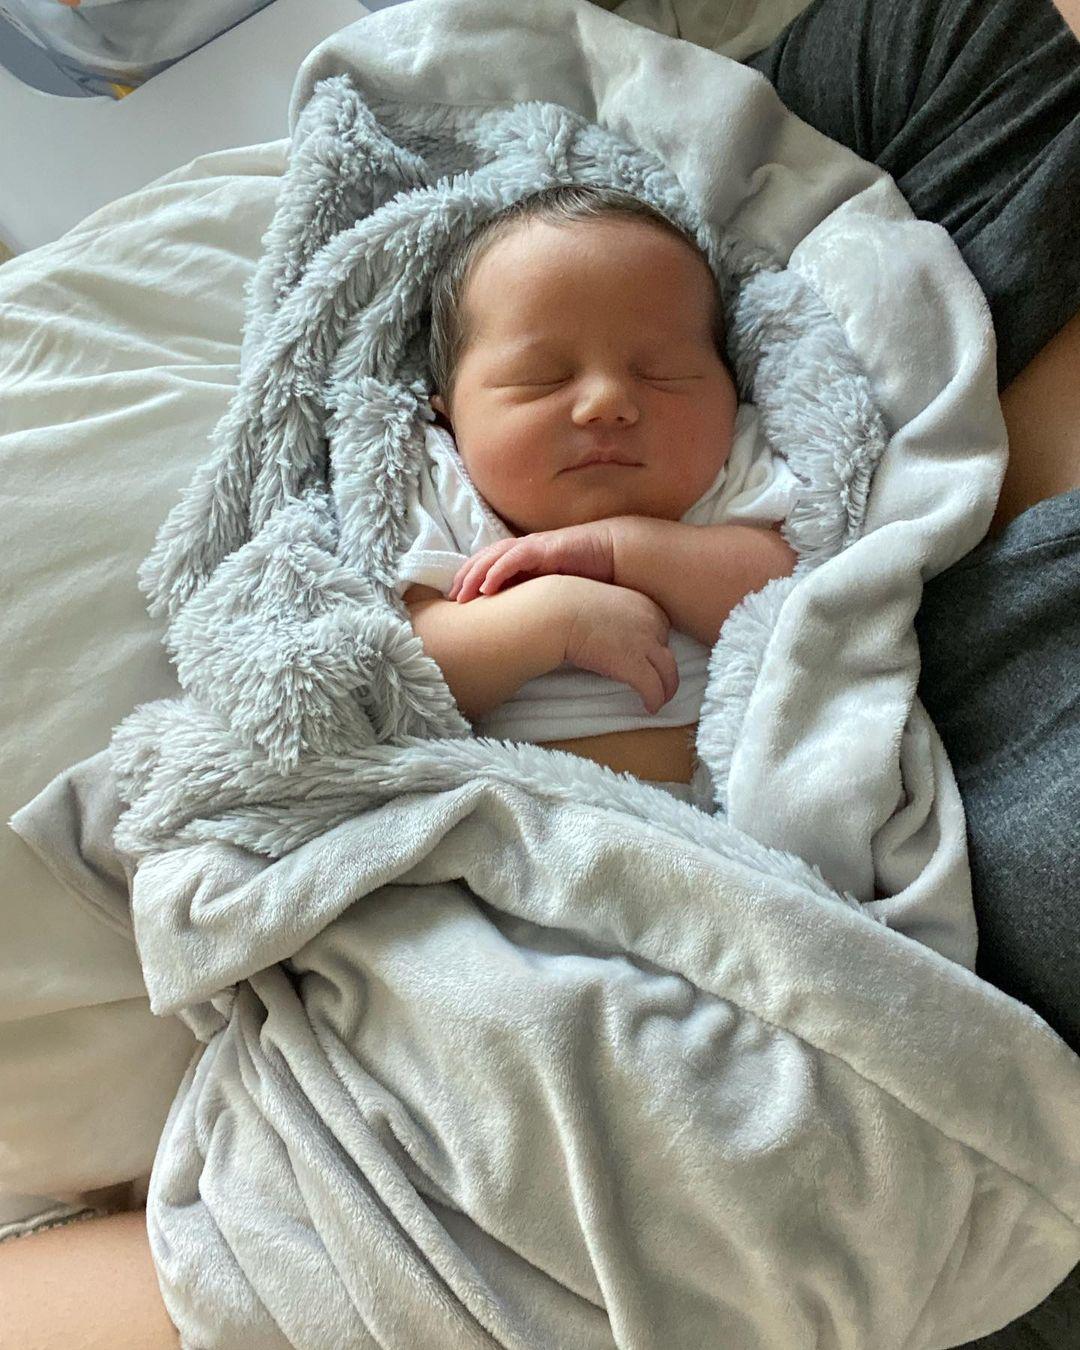 Madlyn Ballatori and Colby Kissinger's Baby